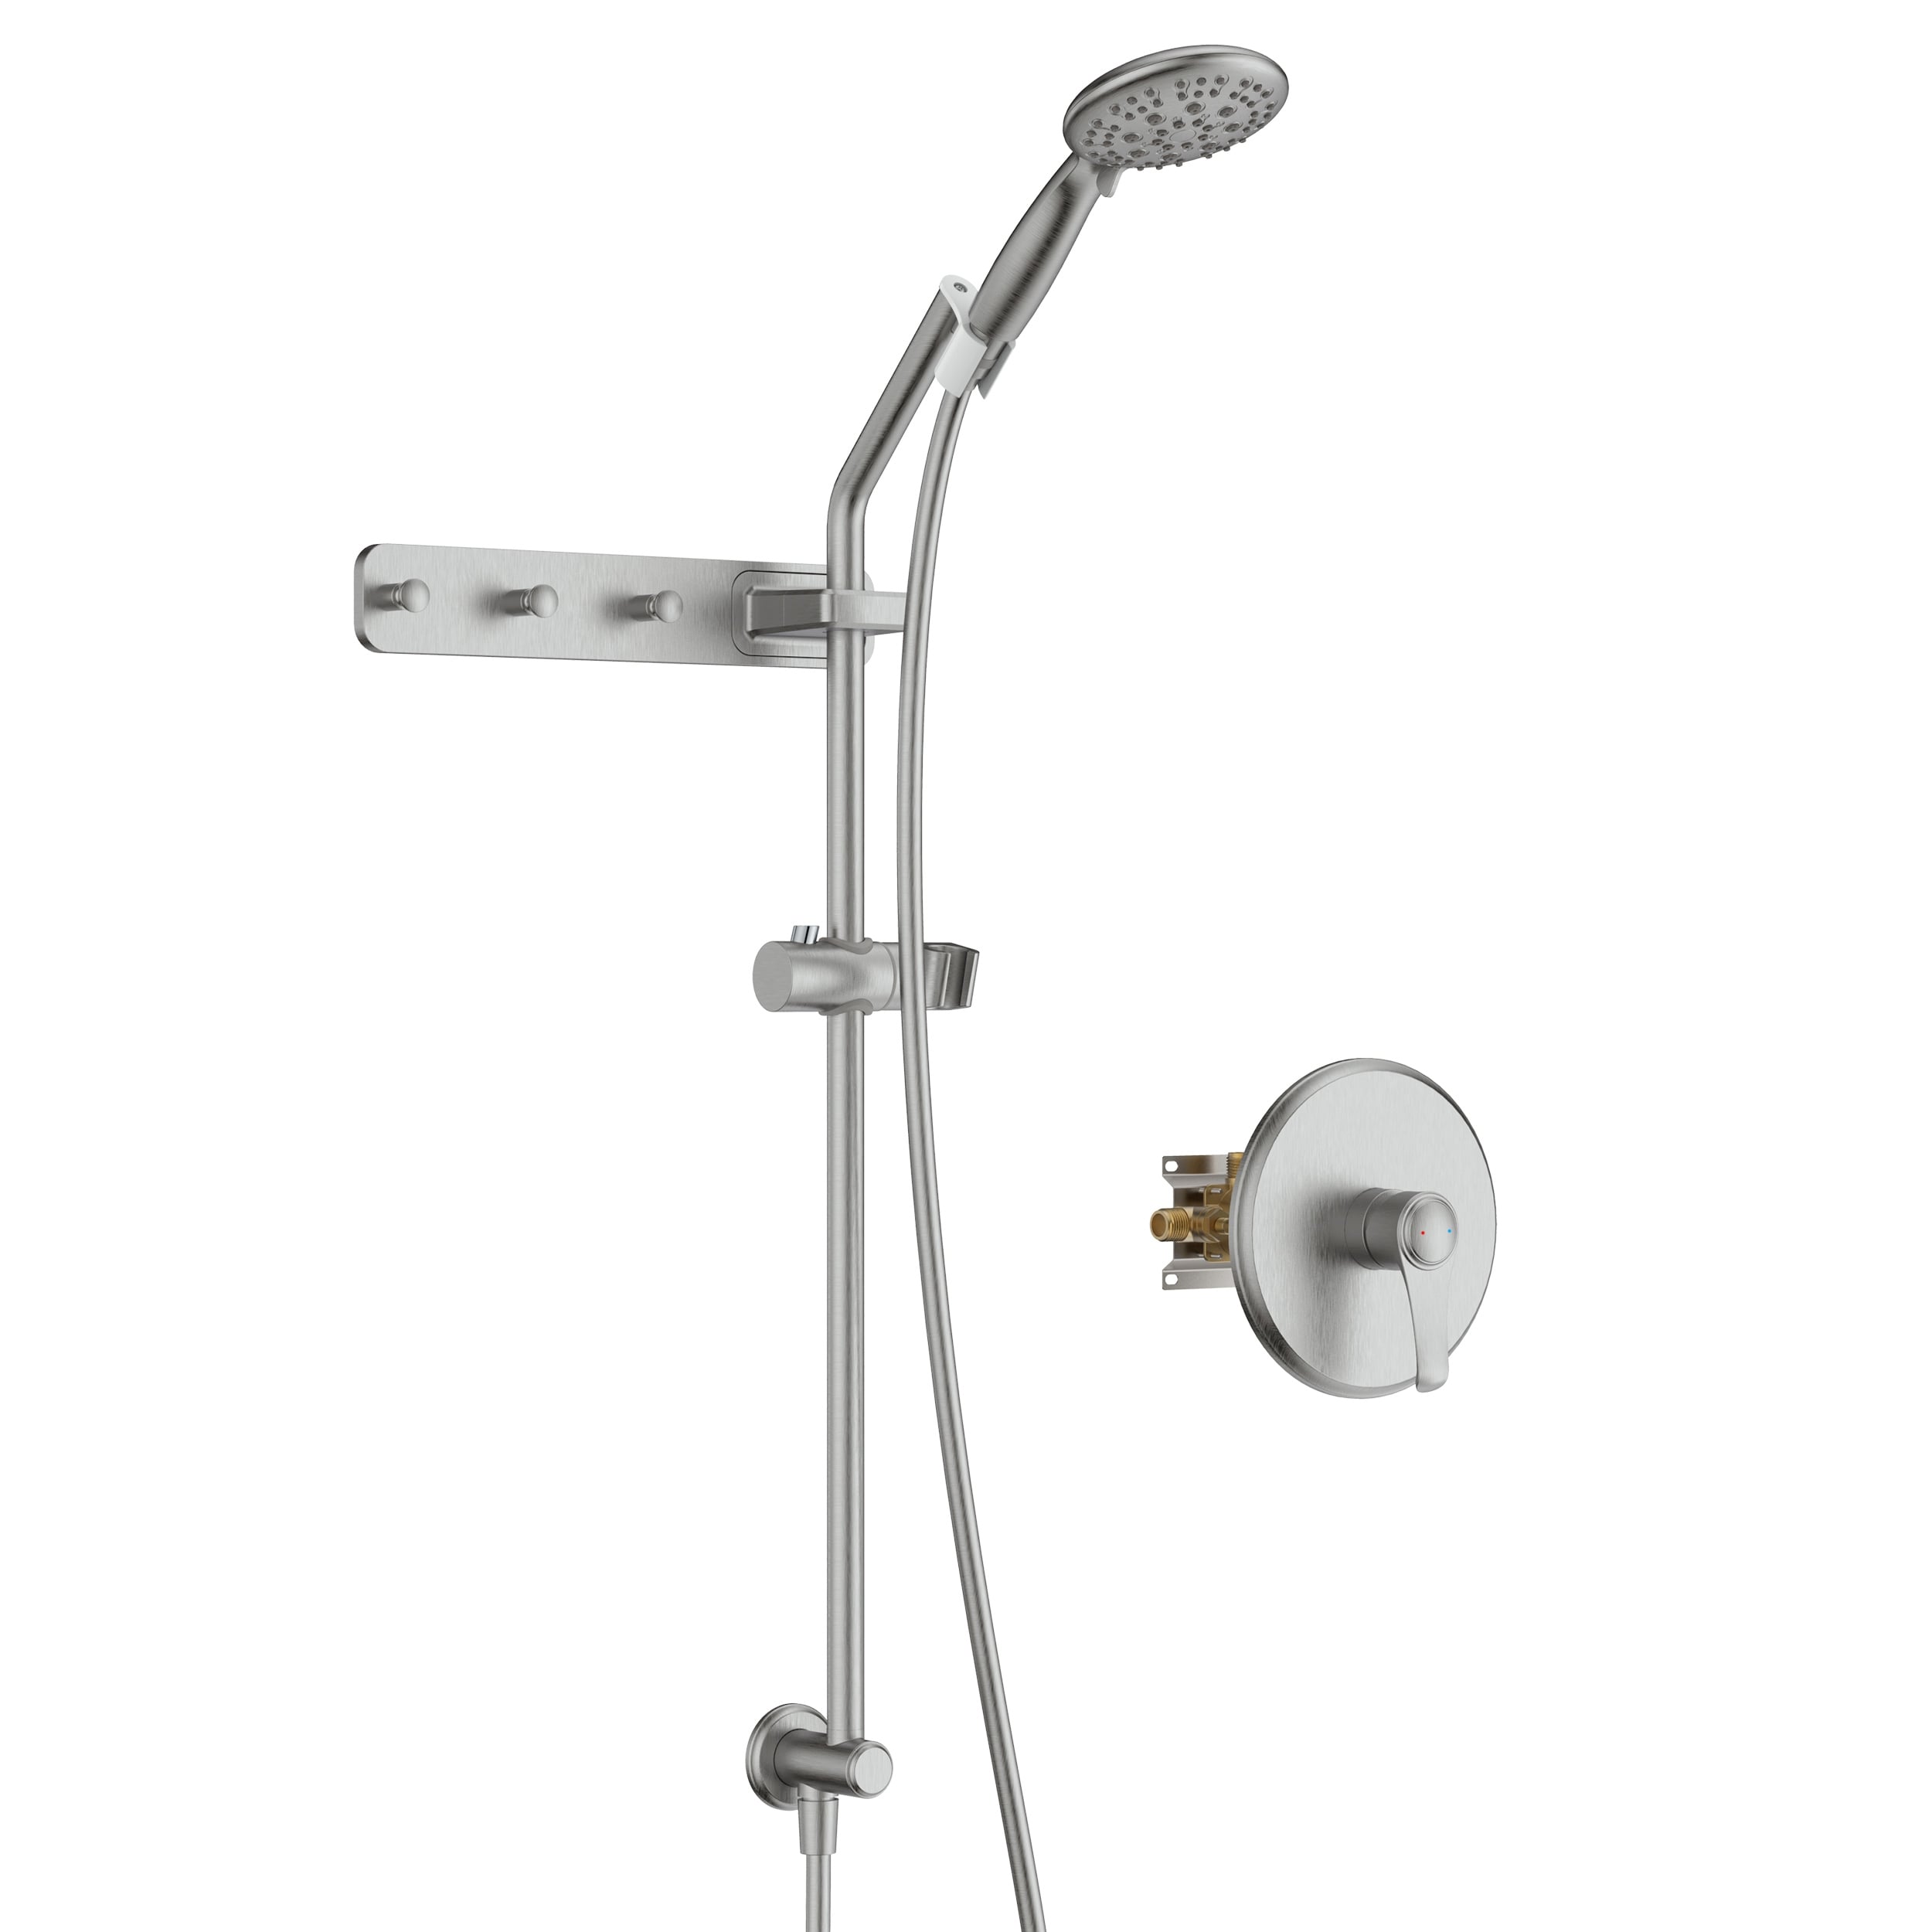 Multi Function Shower Head Shower System with Storage Hook - Brushed Nickel